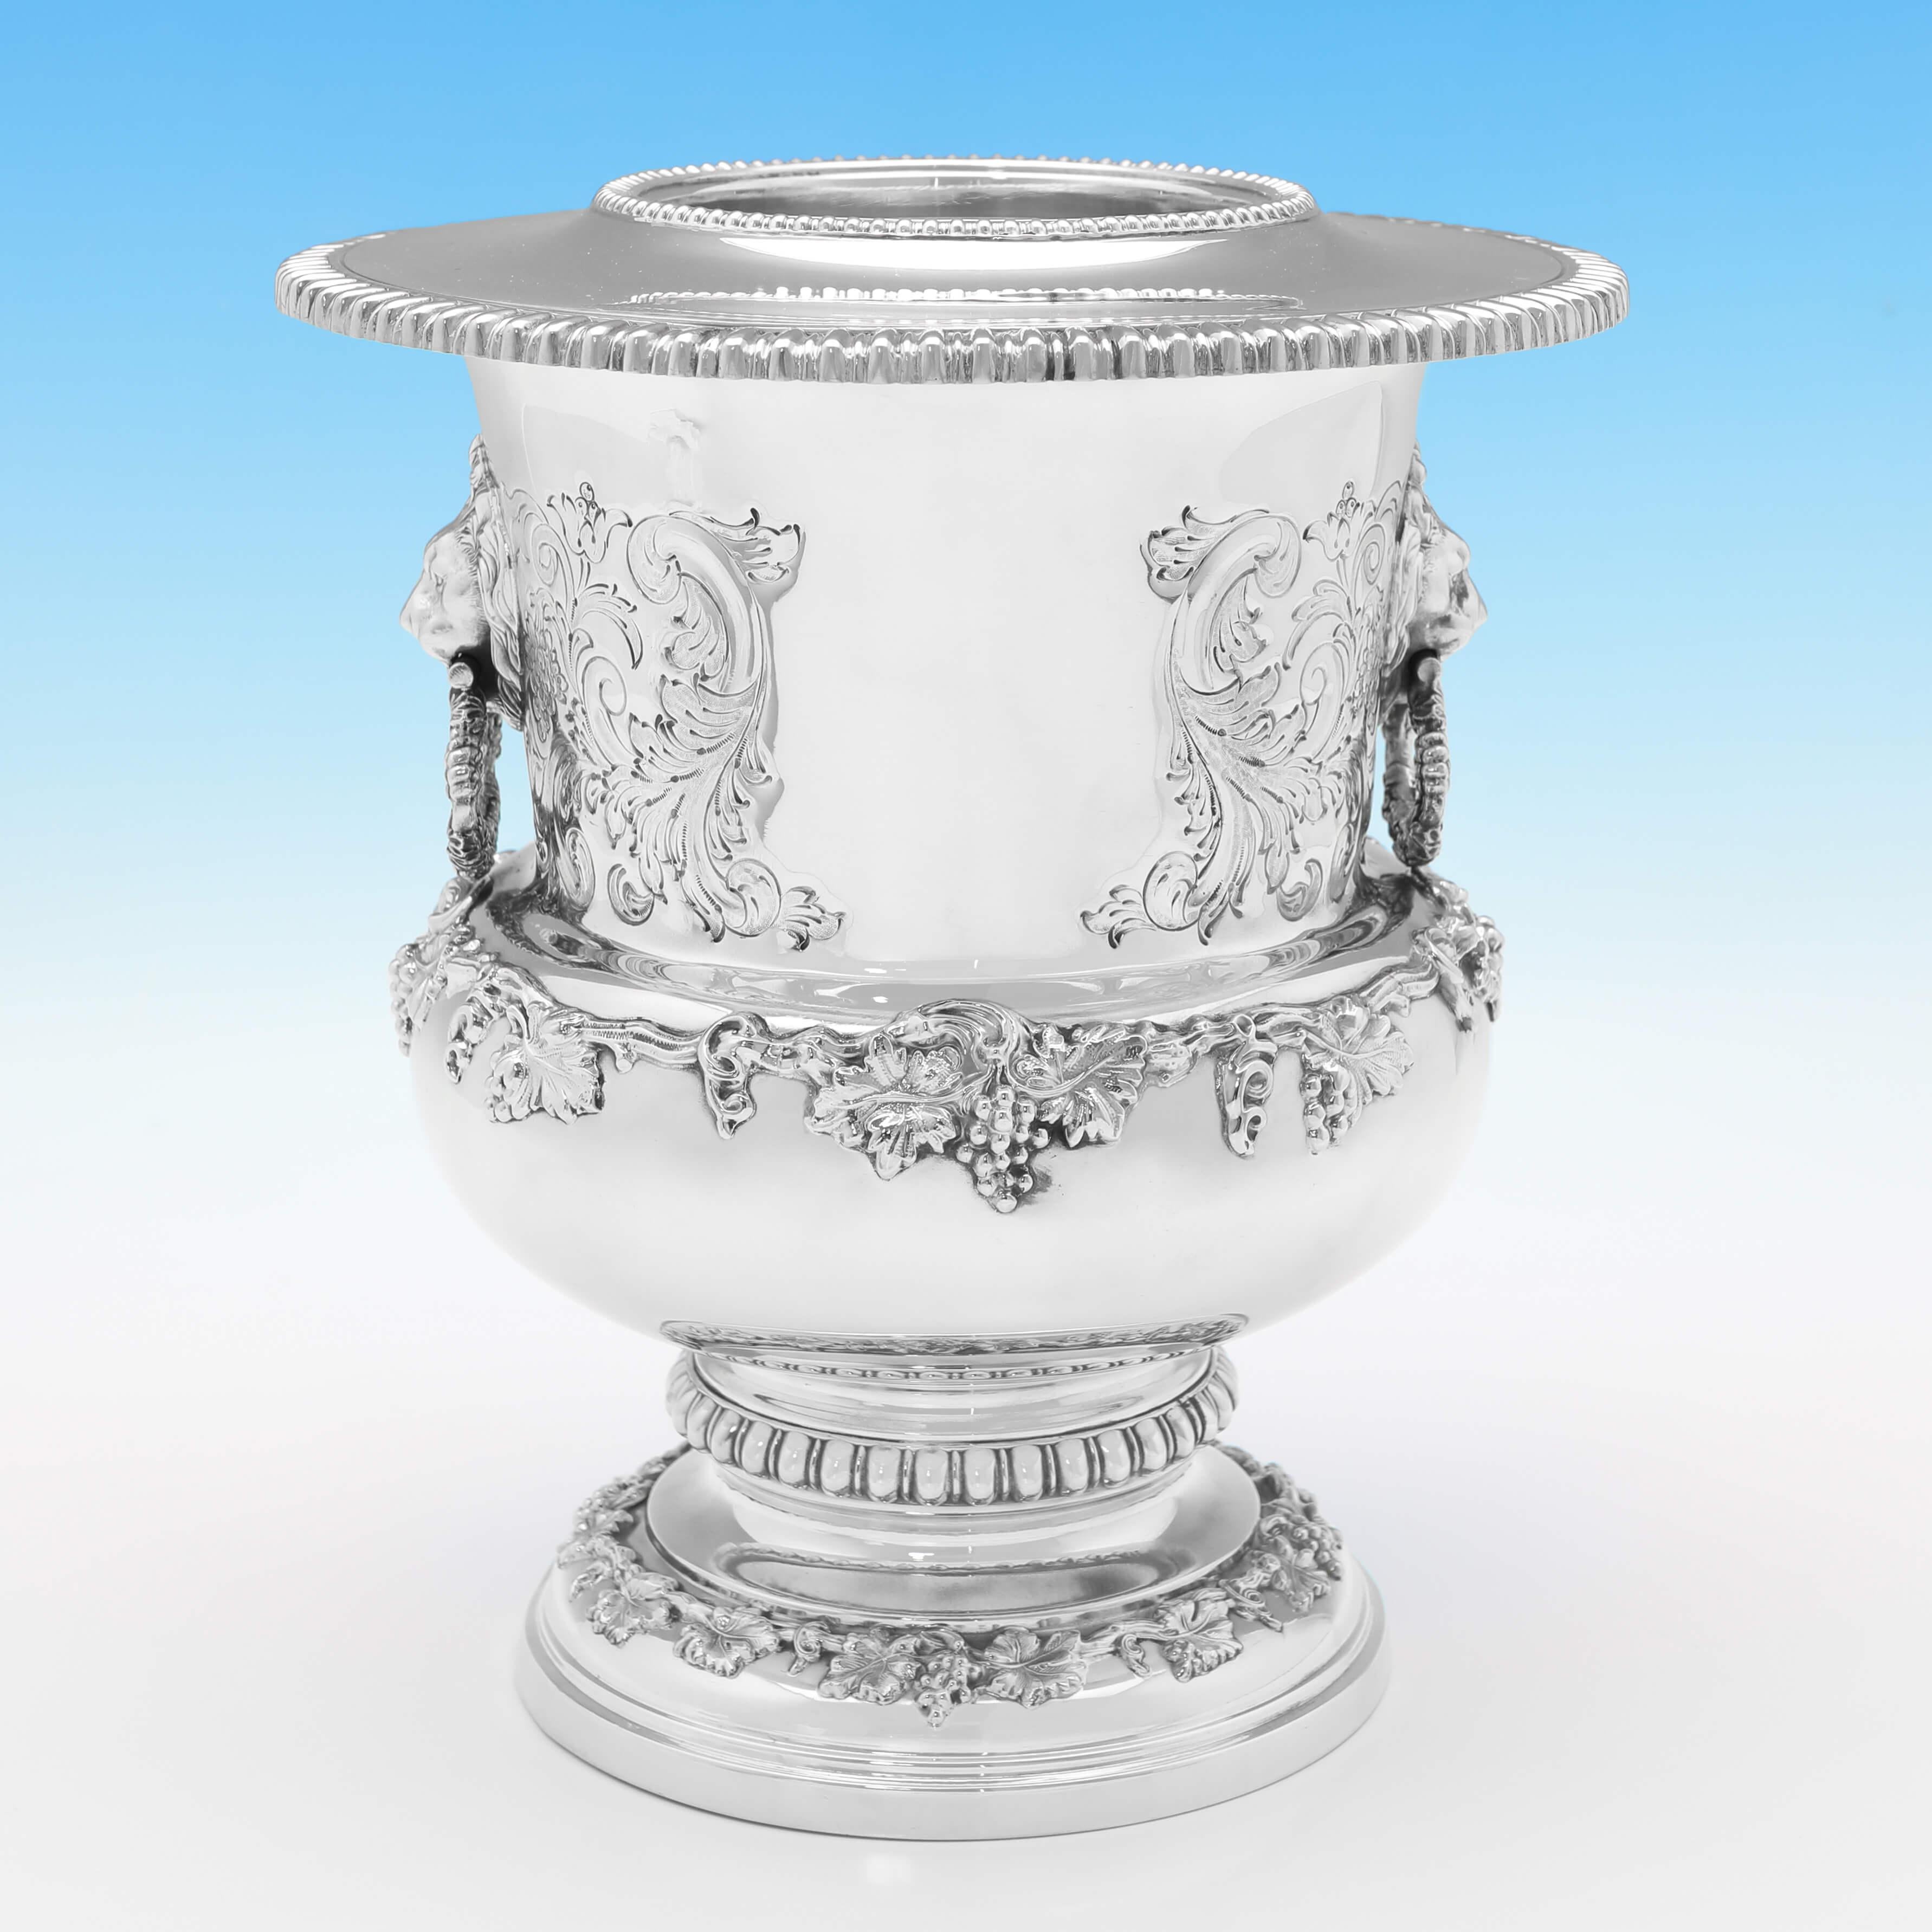 Hallmarked in London in 1973 by Garrard & Co., this striking pair of Sterling Silver Wine Coolers, are in the campagna shape, and feature chased acanthus decoration, lion mask drop ring handle, cast and applied grape and vine borders, and removable